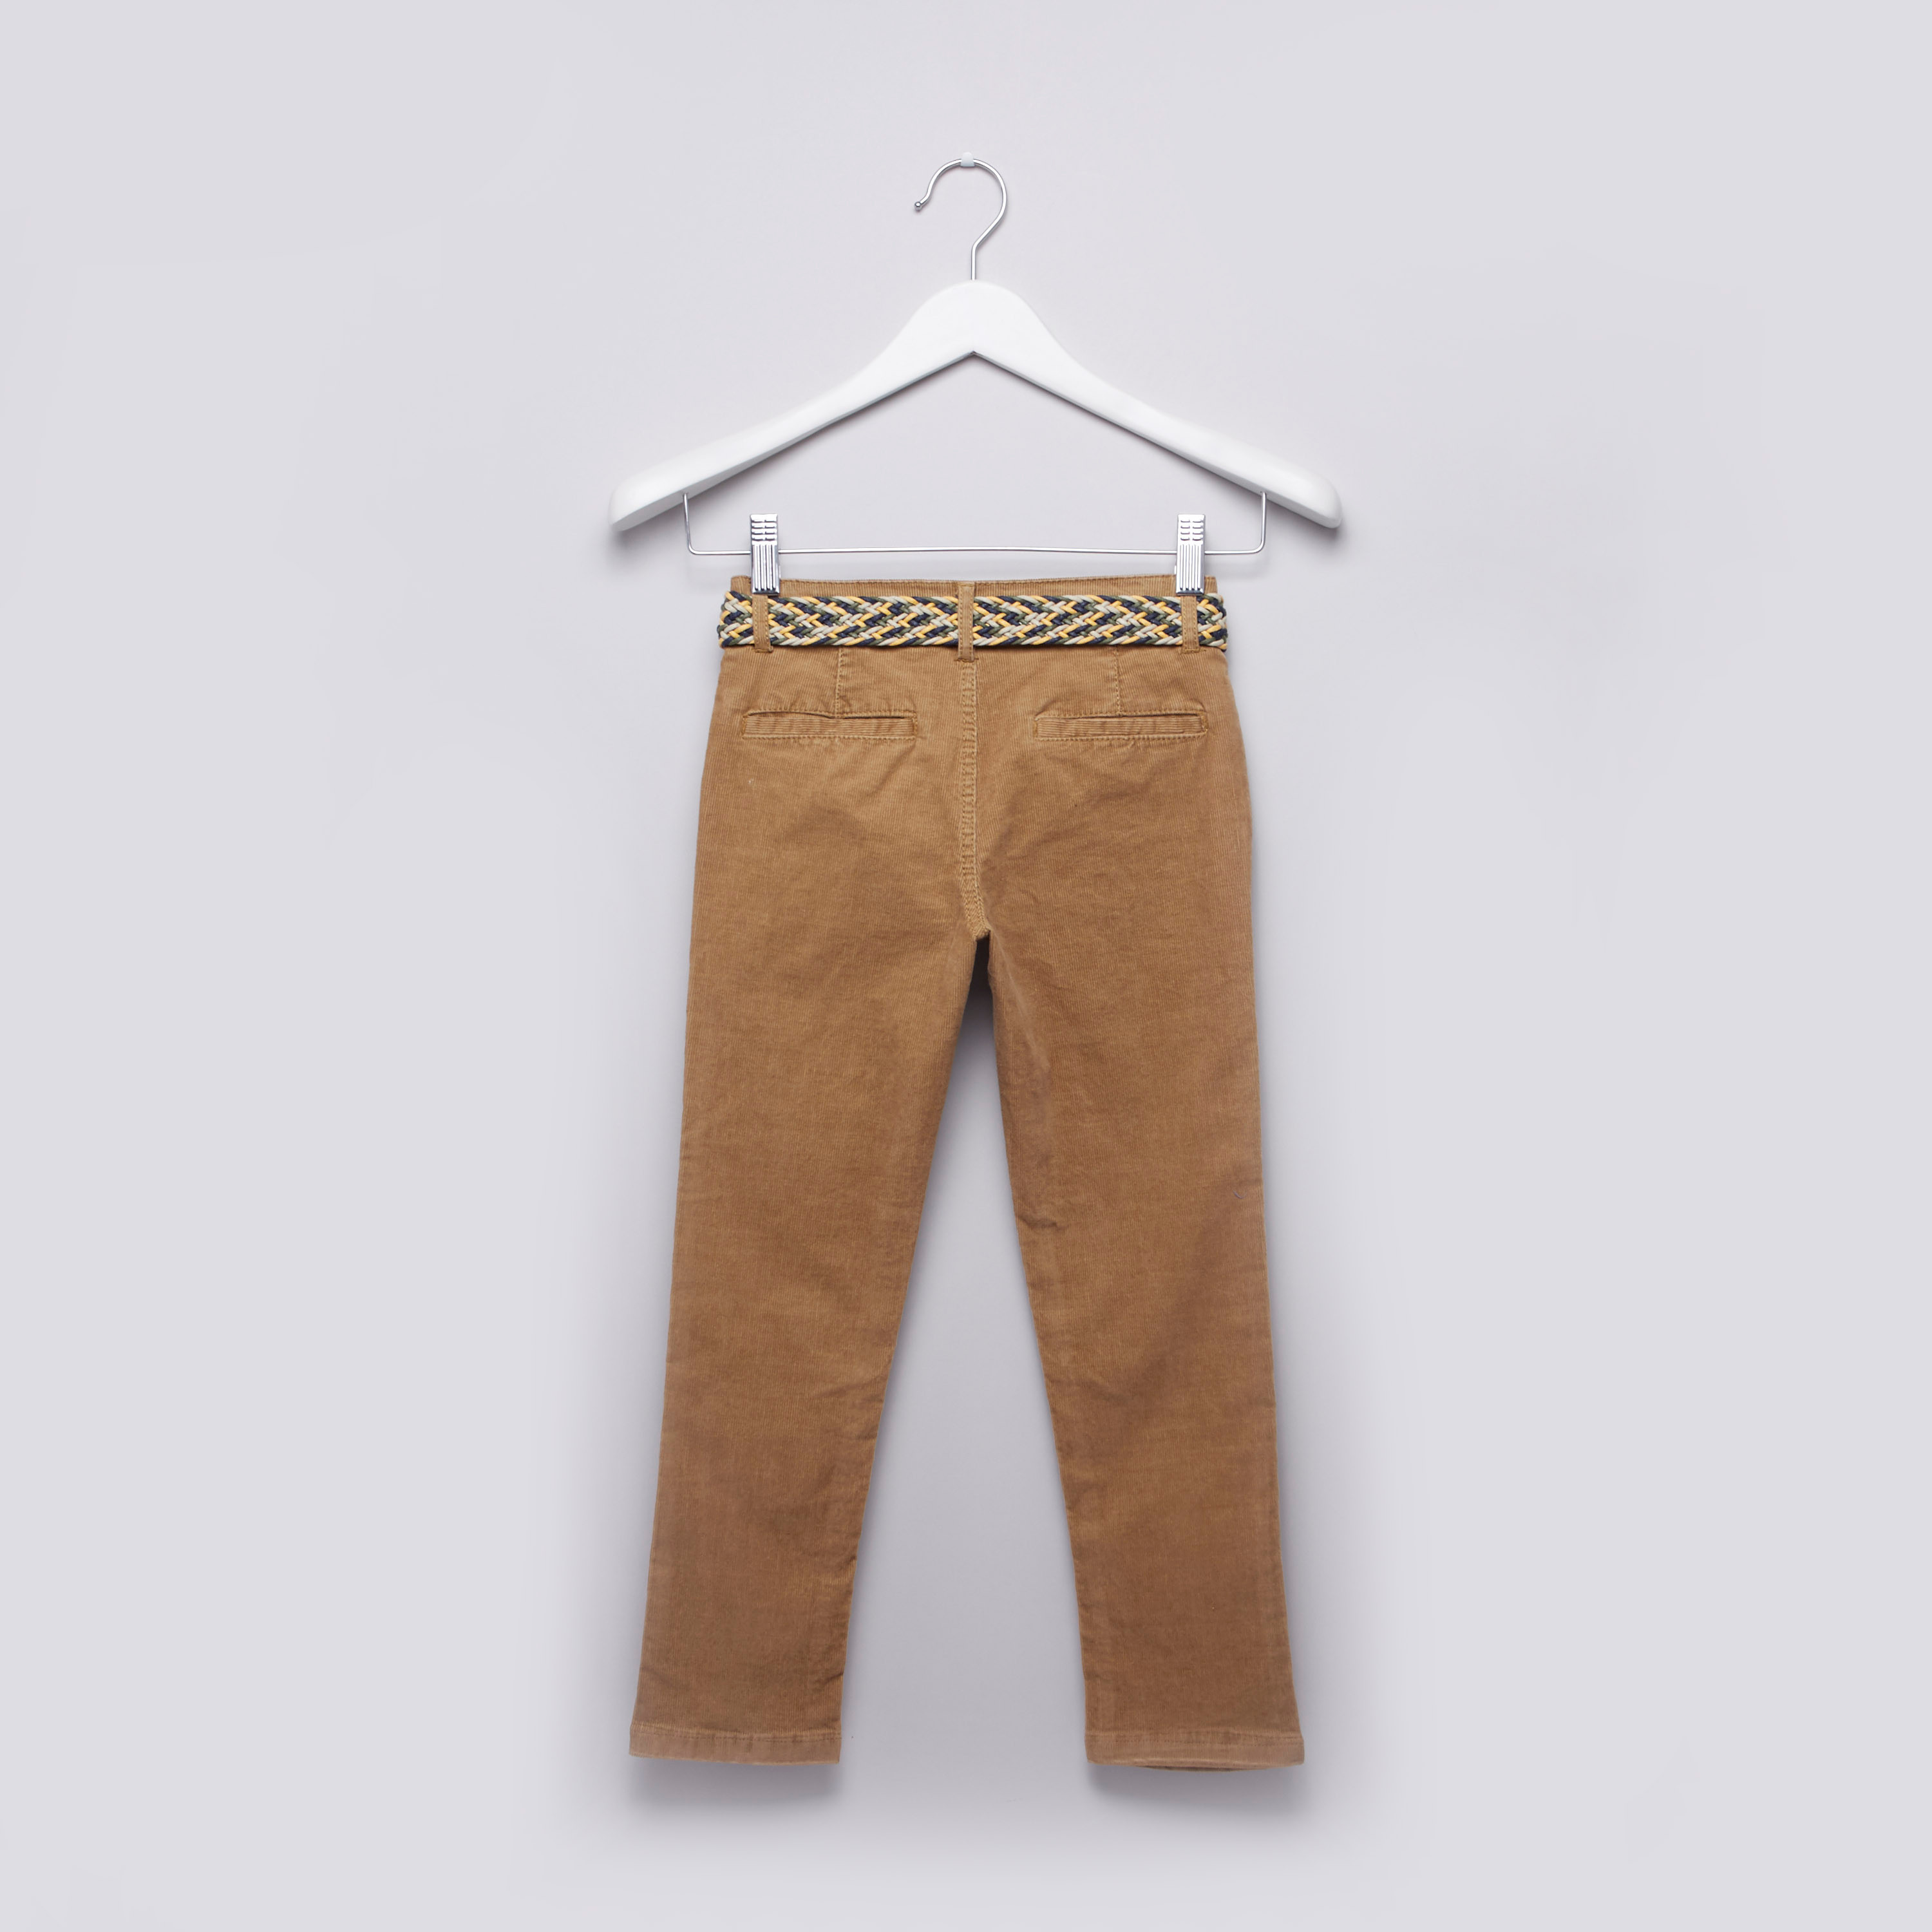 Shop Textured Full Length Pants with Belt and Pocket Detail Online 